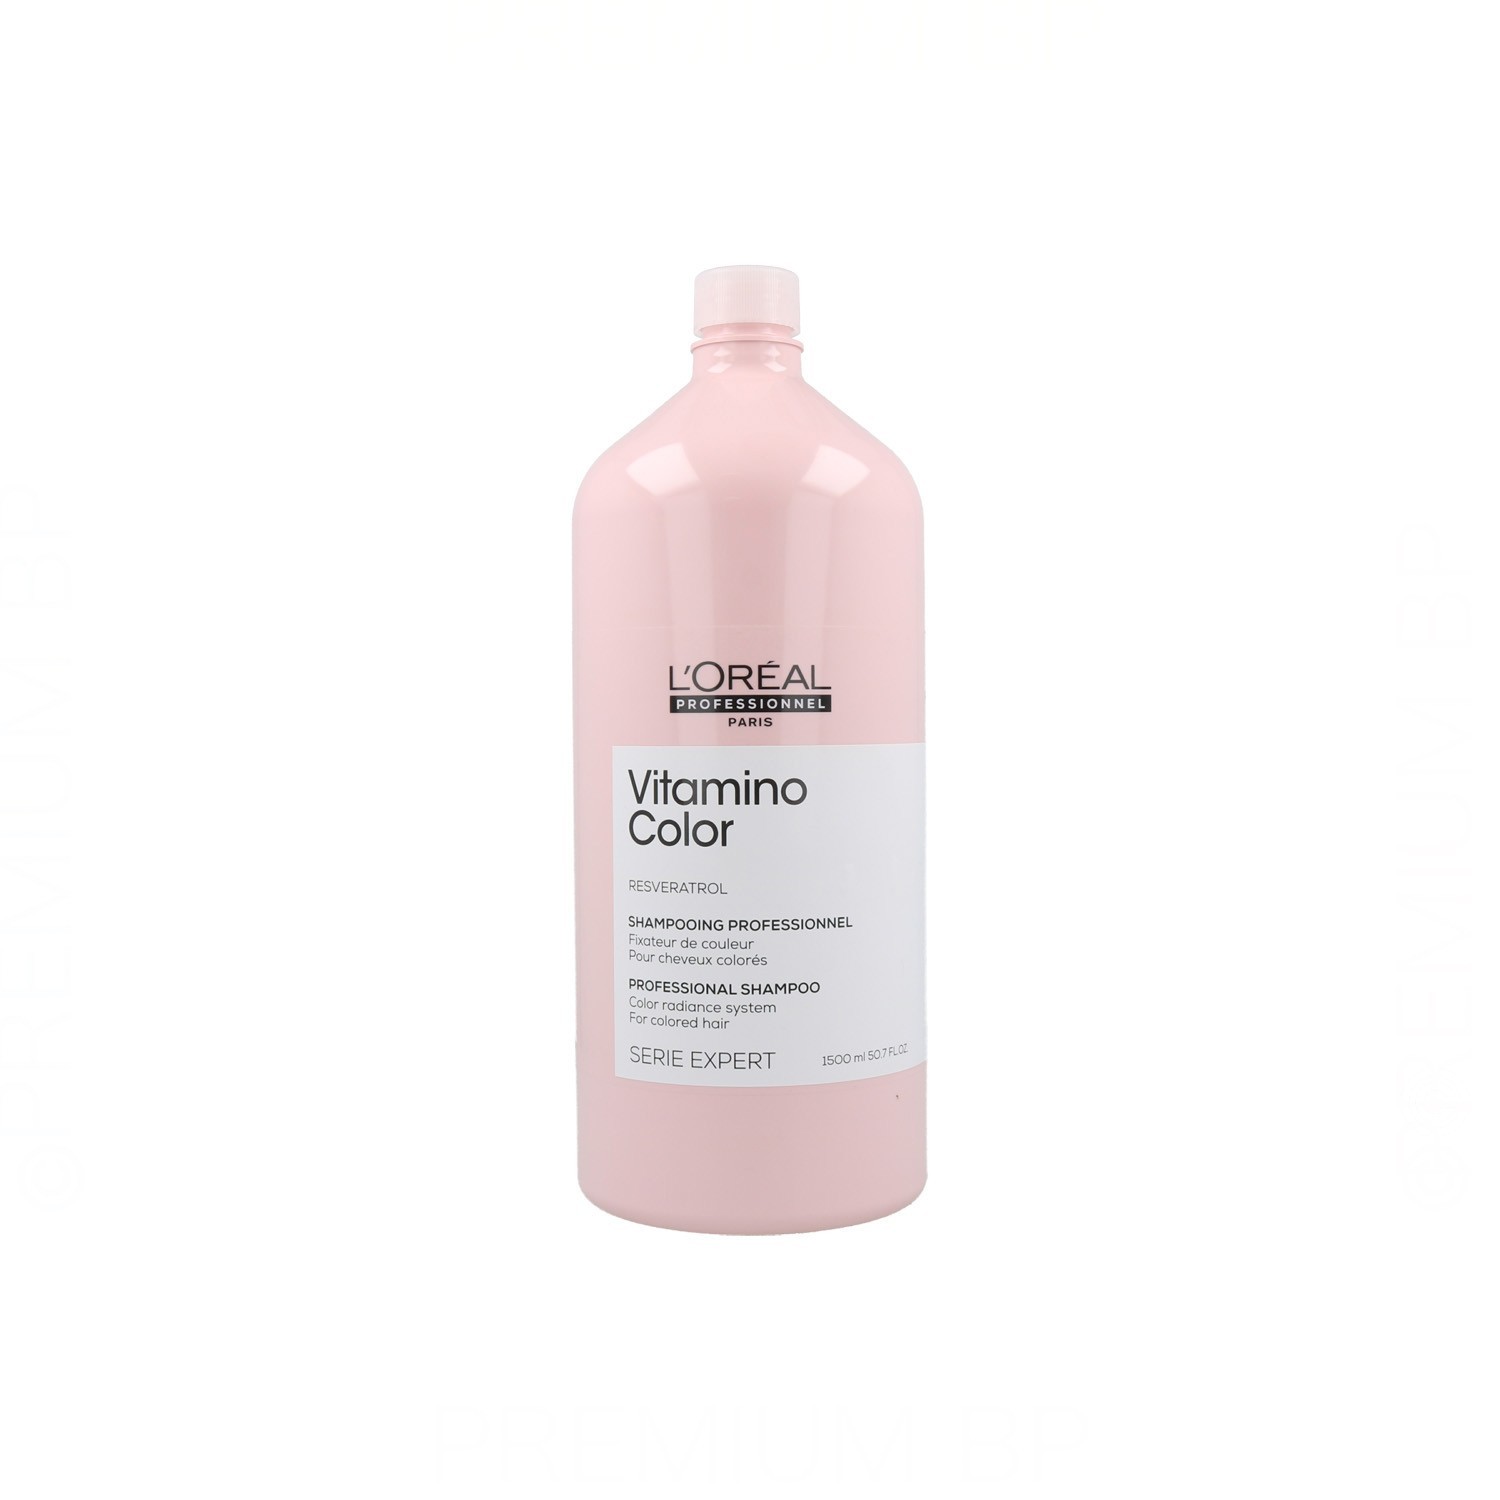 Loreal Expert Vitamino Color Shampoo ml at the best price.